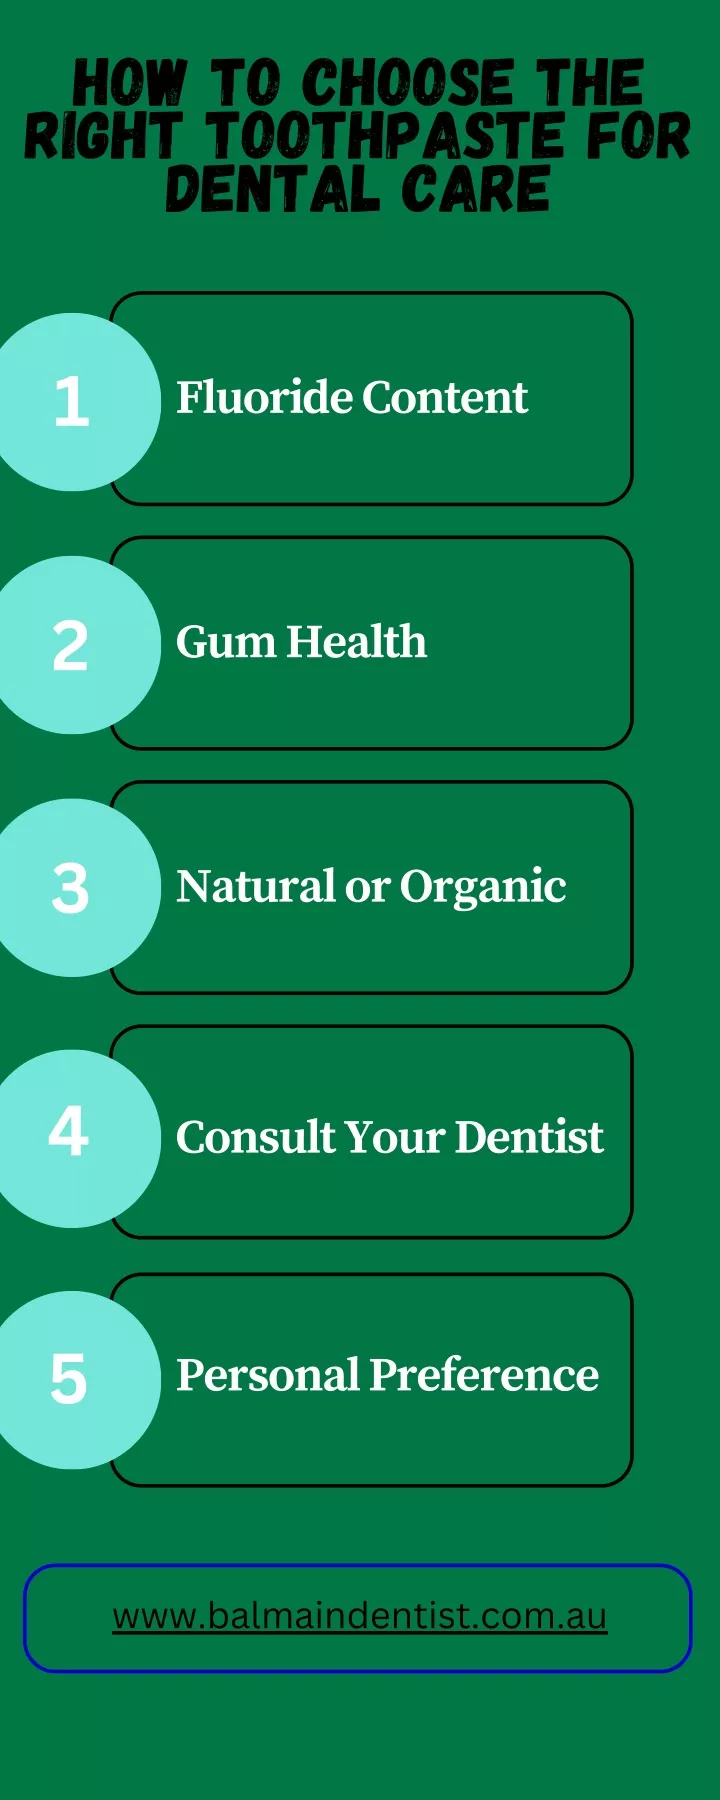 how to choose the right toothpaste for dental care